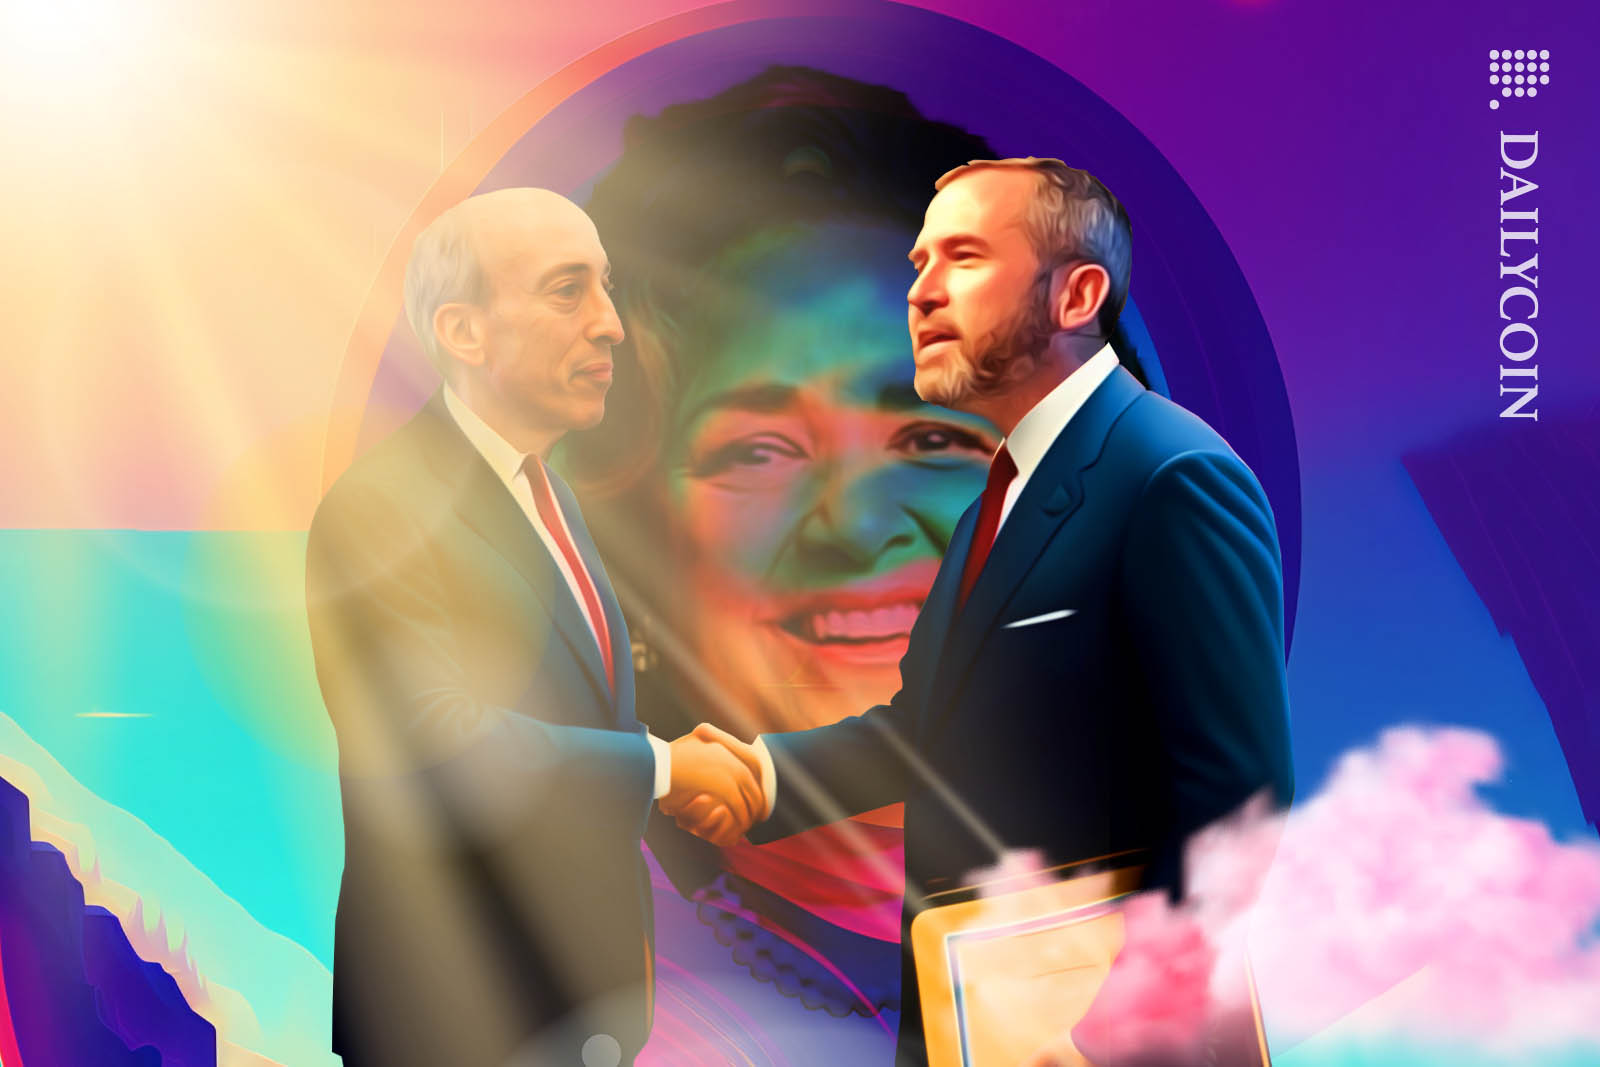 Gary Gensler and Bred Garlinghouse shaking hands infront of Judge Torres in a dream like scenario.